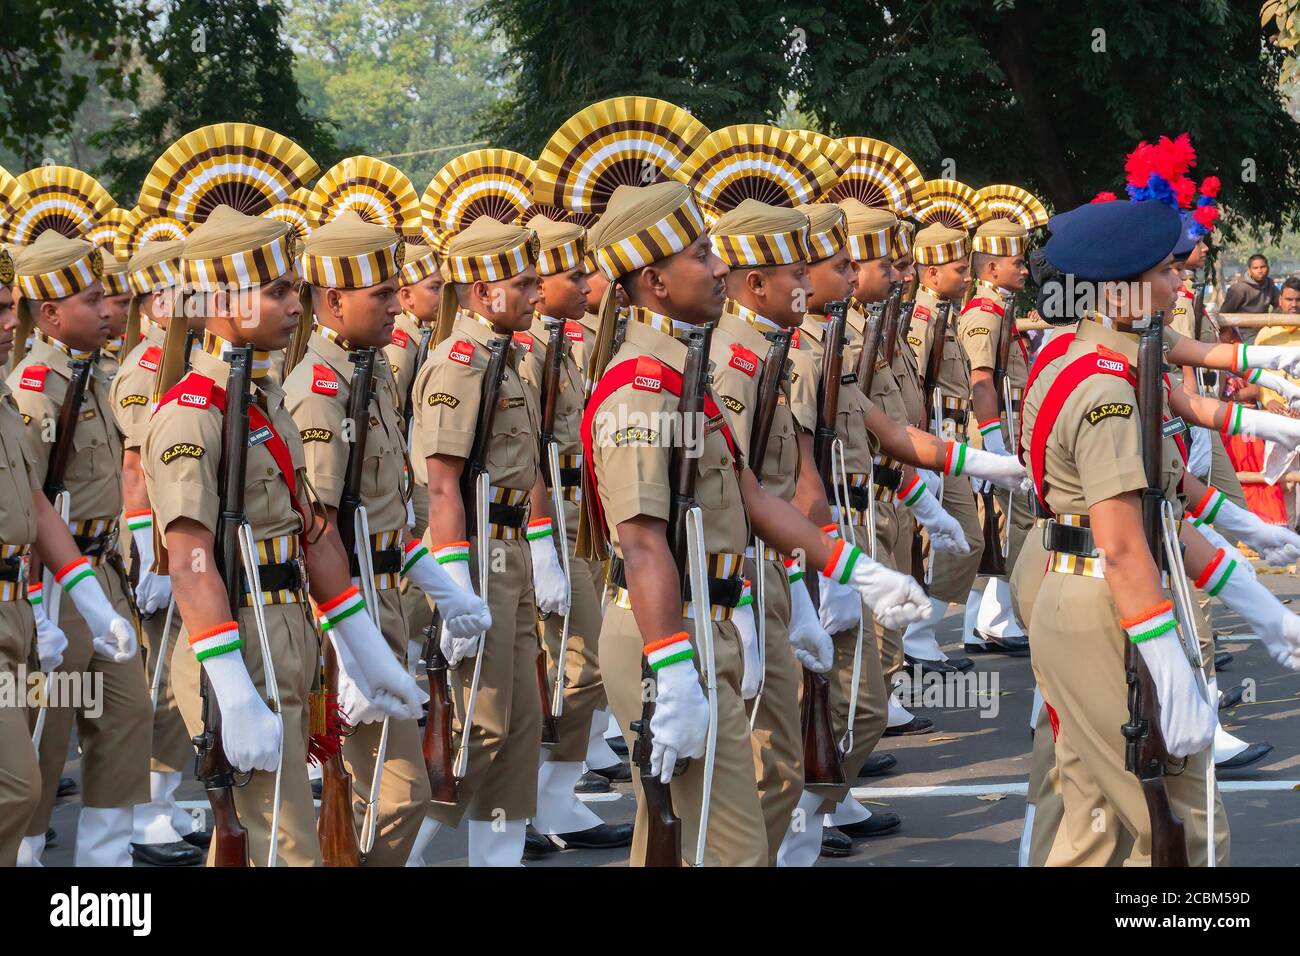 Kolkata, West Bengal, India - 26th January 2020 : Khaki dress and colourful hats of India's Central Social Welfare Board (CSWB) cadets while marching. Stock Photo